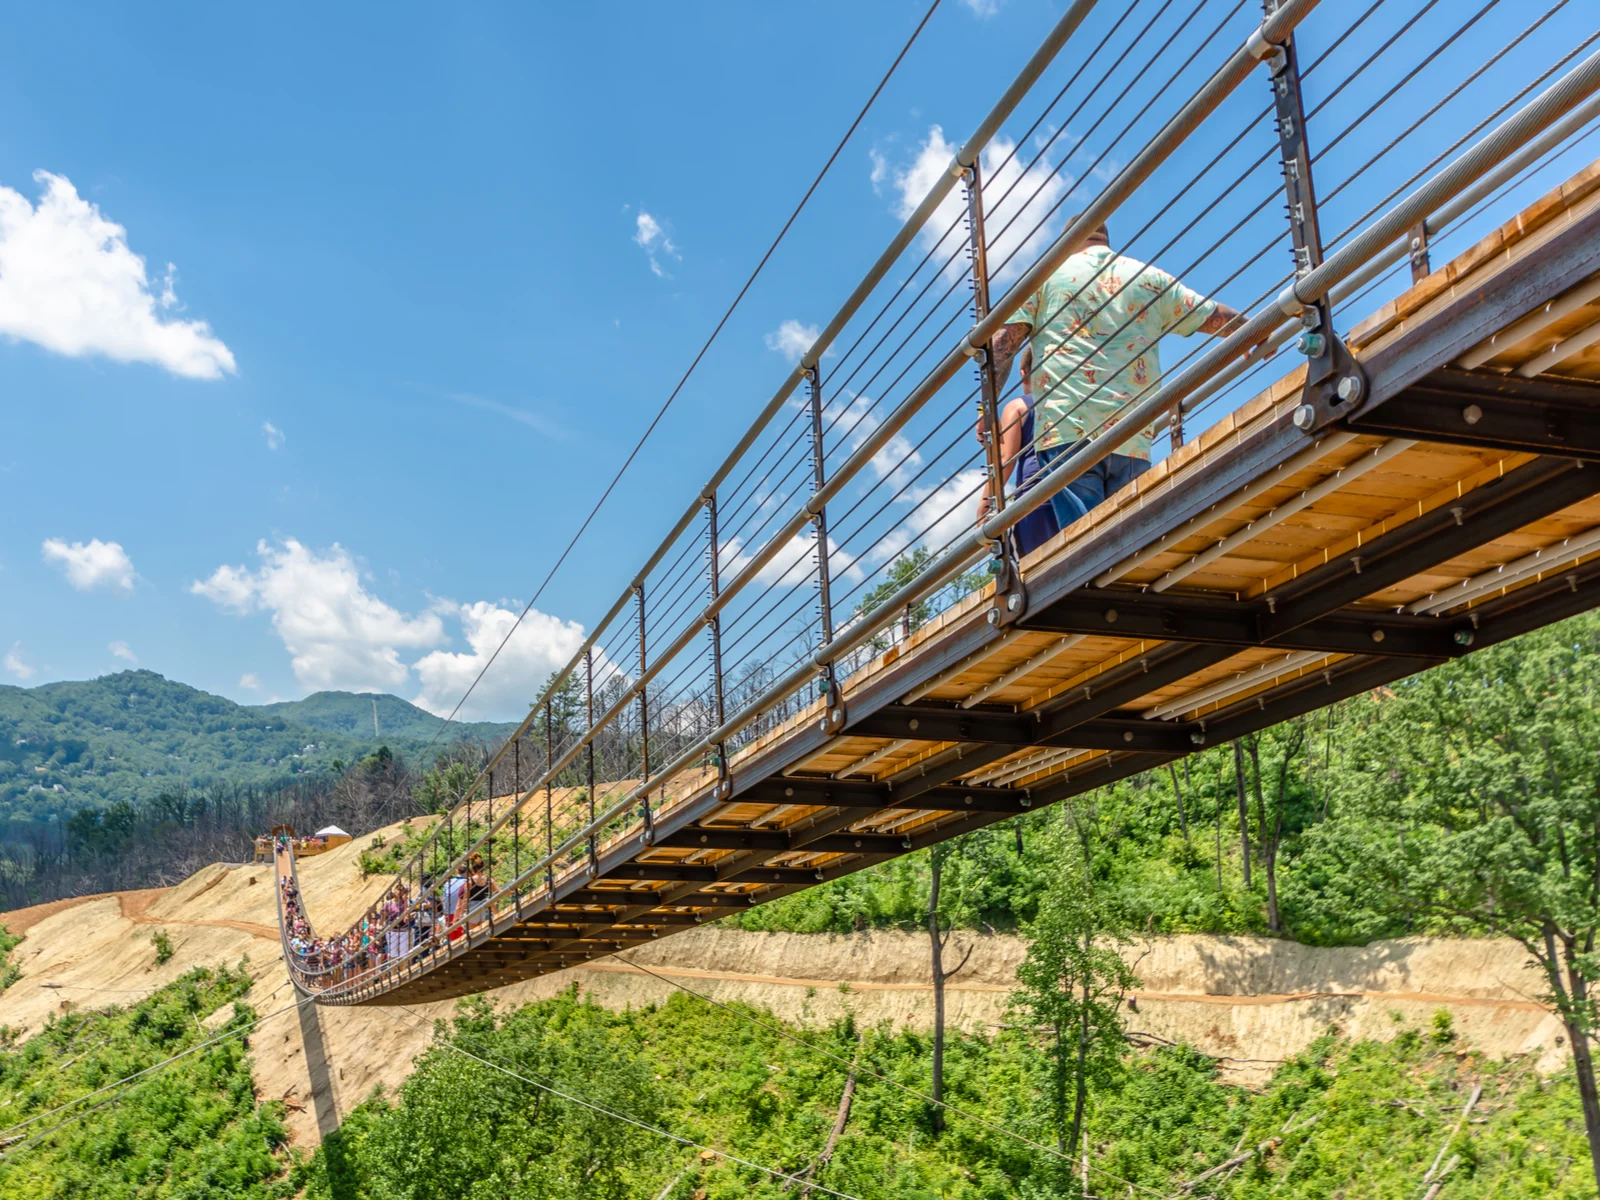 Skybridge Gatlinburg spanning the smoky mountain gorge for a piece on the best things to do in Gatlinburg